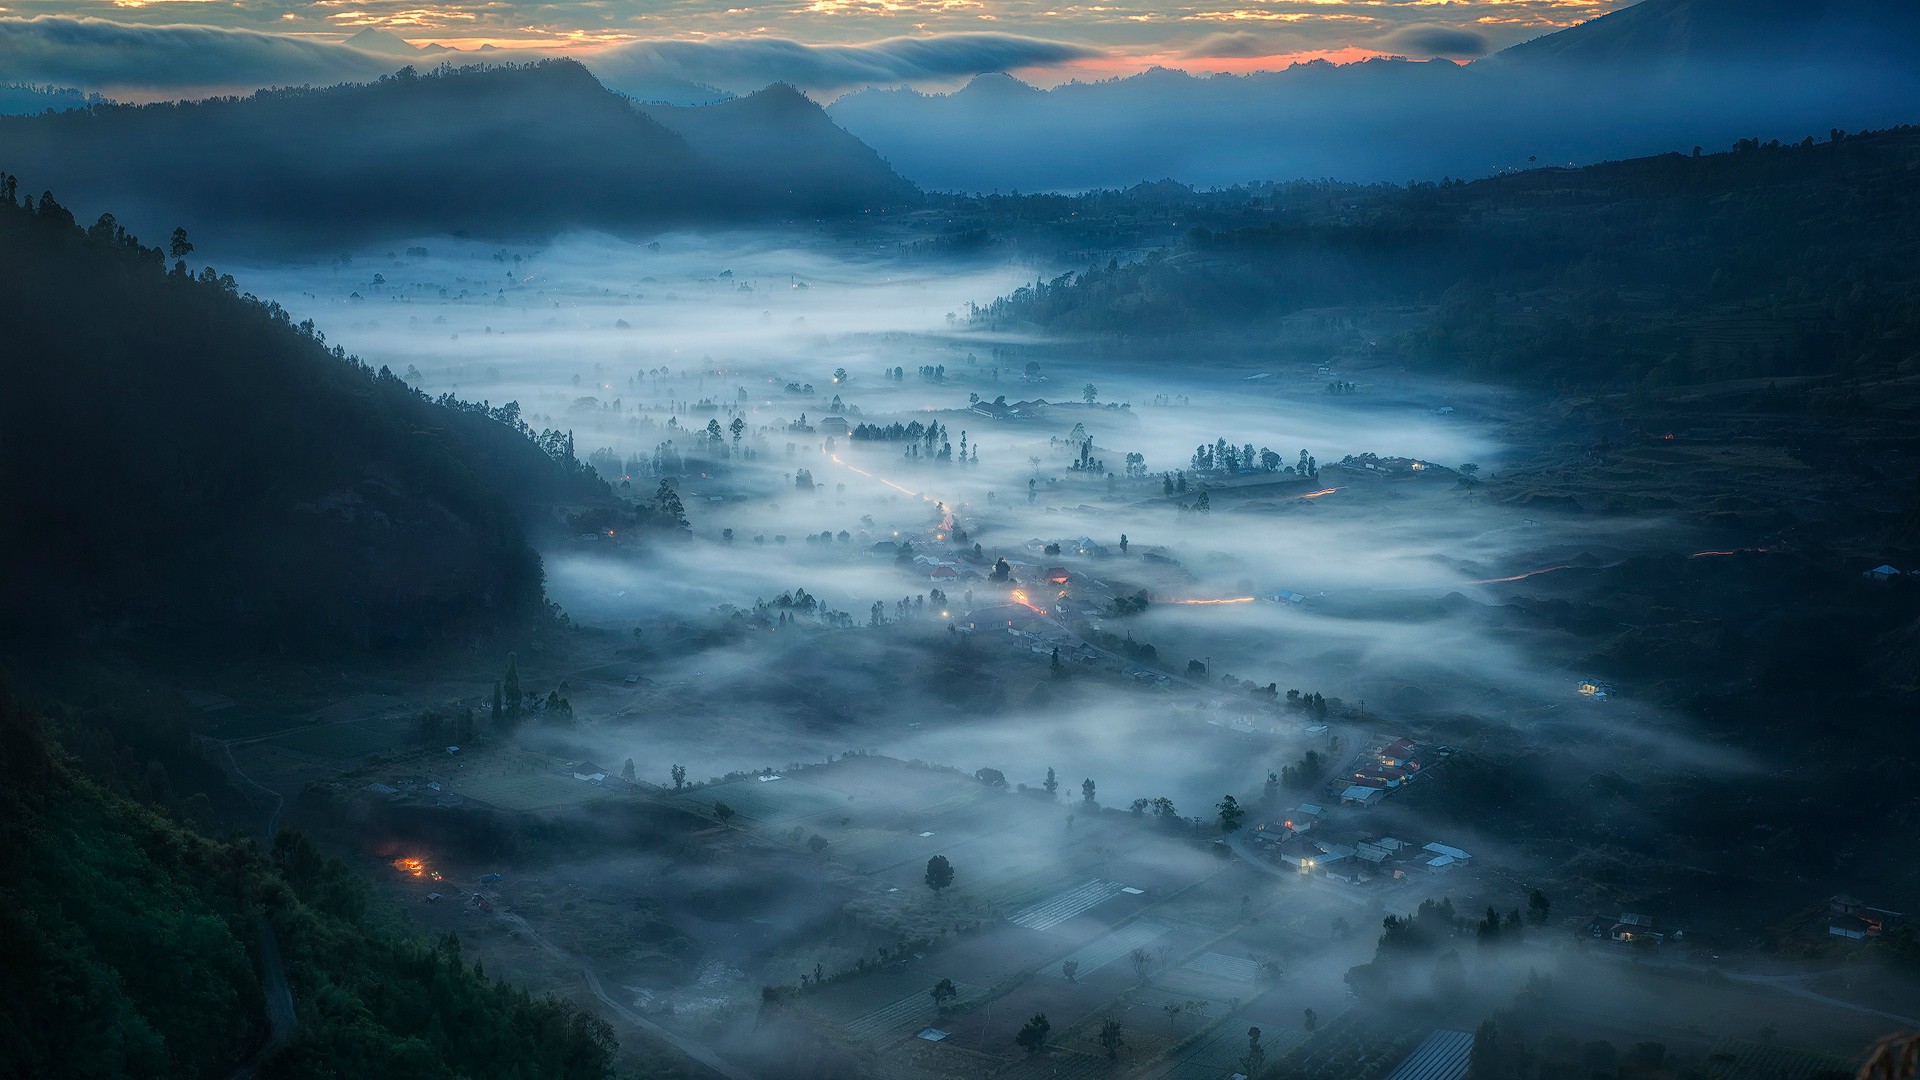 General 1920x1080 nature landscape clouds aerial view Indonesia Bali mist trees forest mountains hills field village house lights morning